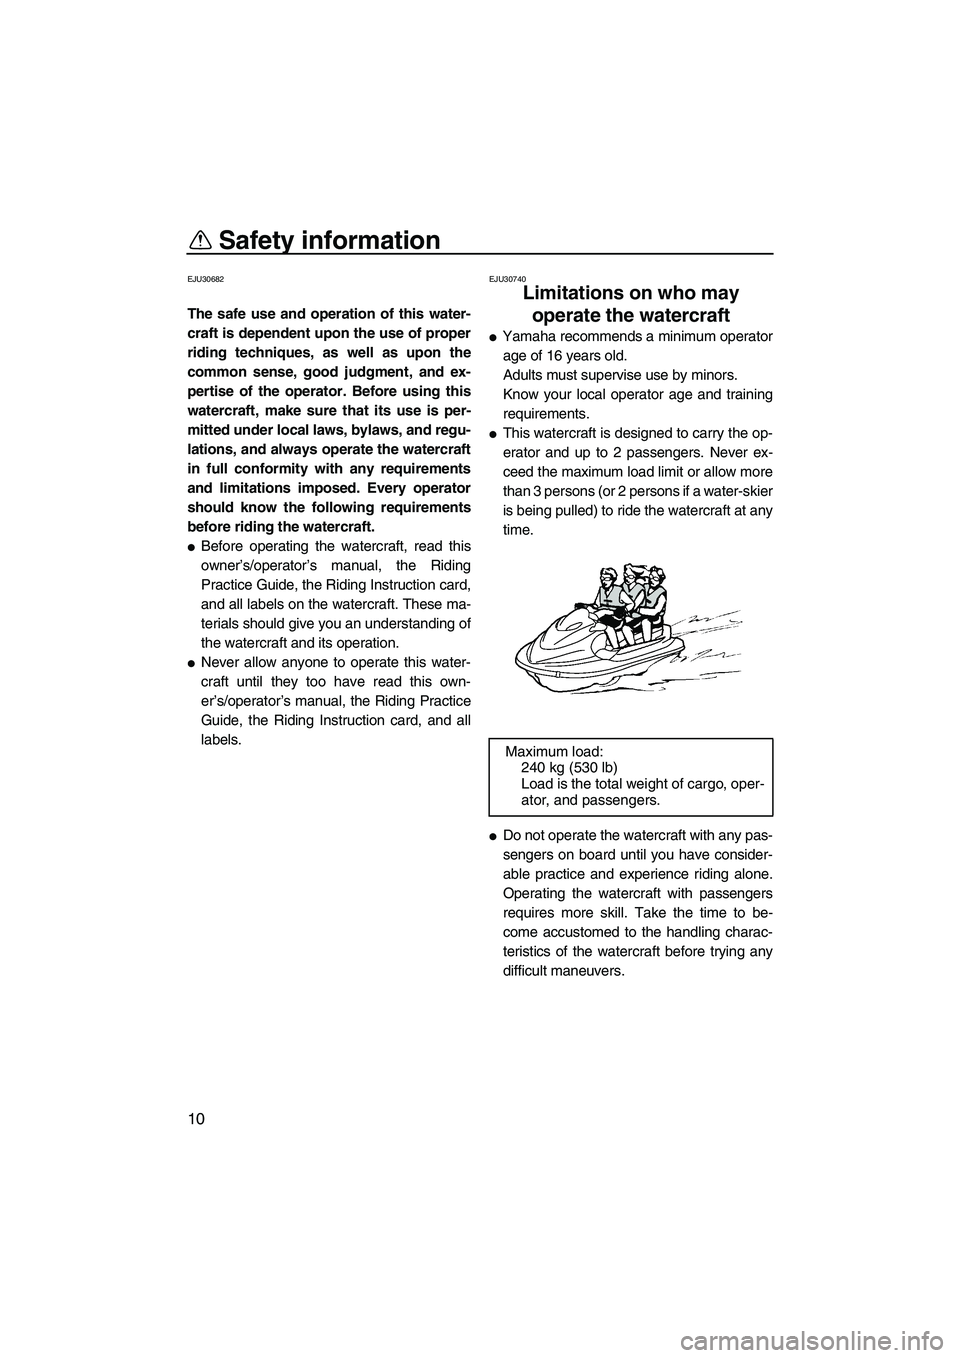 YAMAHA SVHO 2011 User Guide Safety information
10
EJU30682
The safe use and operation of this water-
craft is dependent upon the use of proper
riding techniques, as well as upon the
common sense, good judgment, and ex-
pertise o